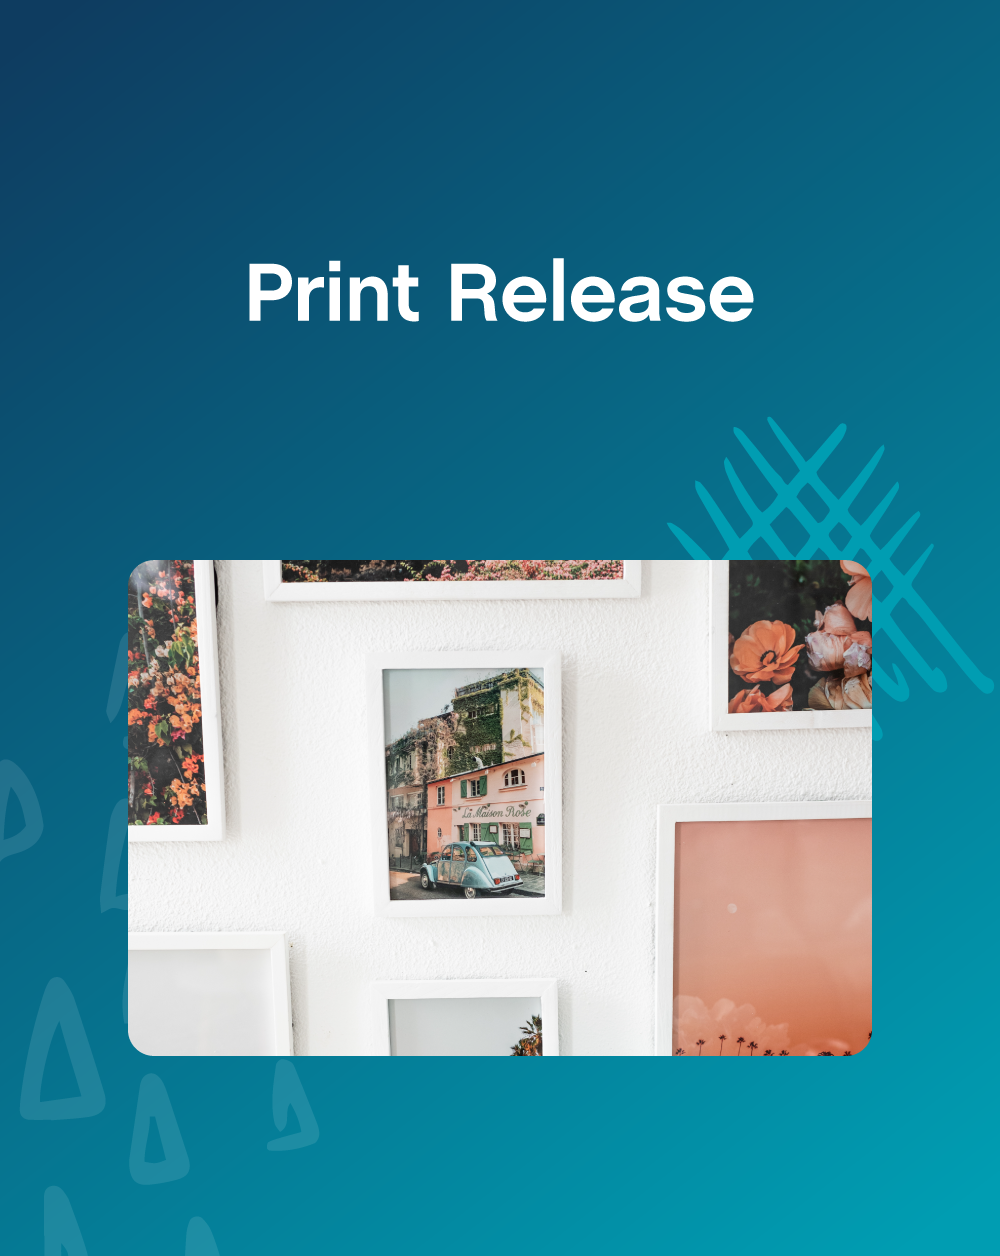 Print Release Contract Template - The Contract Shop®